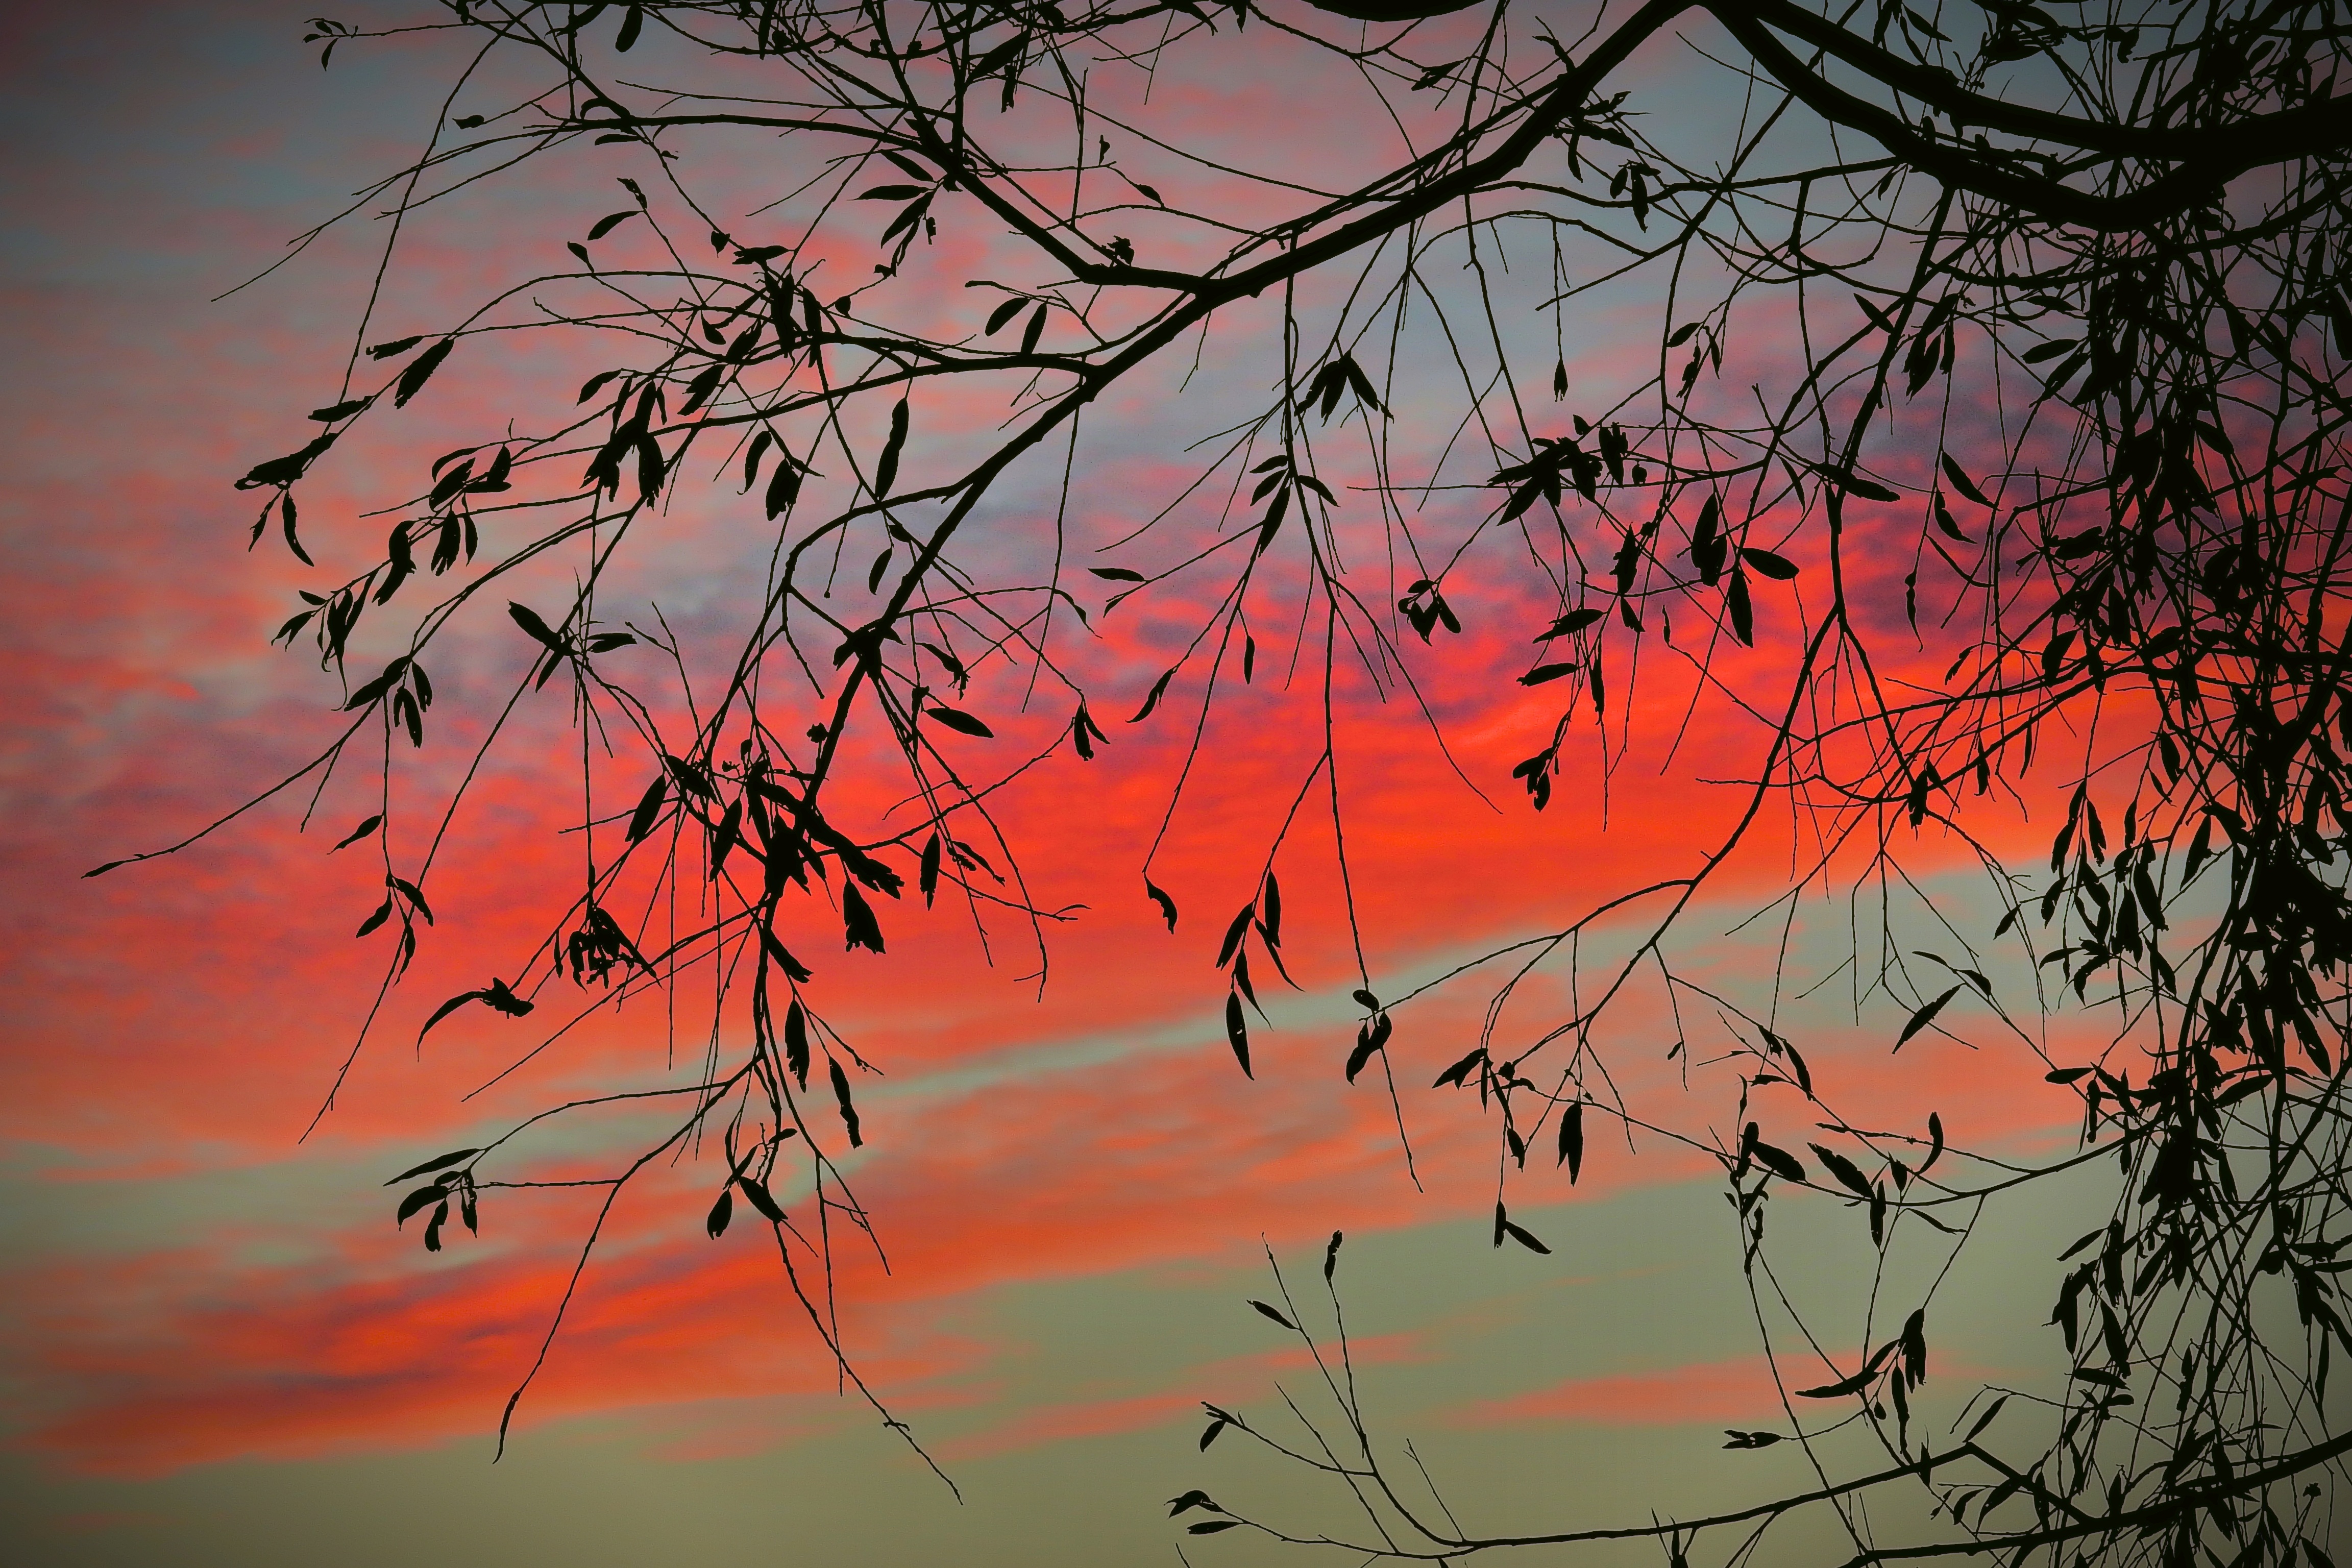 leaves, tree, twilight, nature, sunset, sky, clouds, wood, branch, dusk